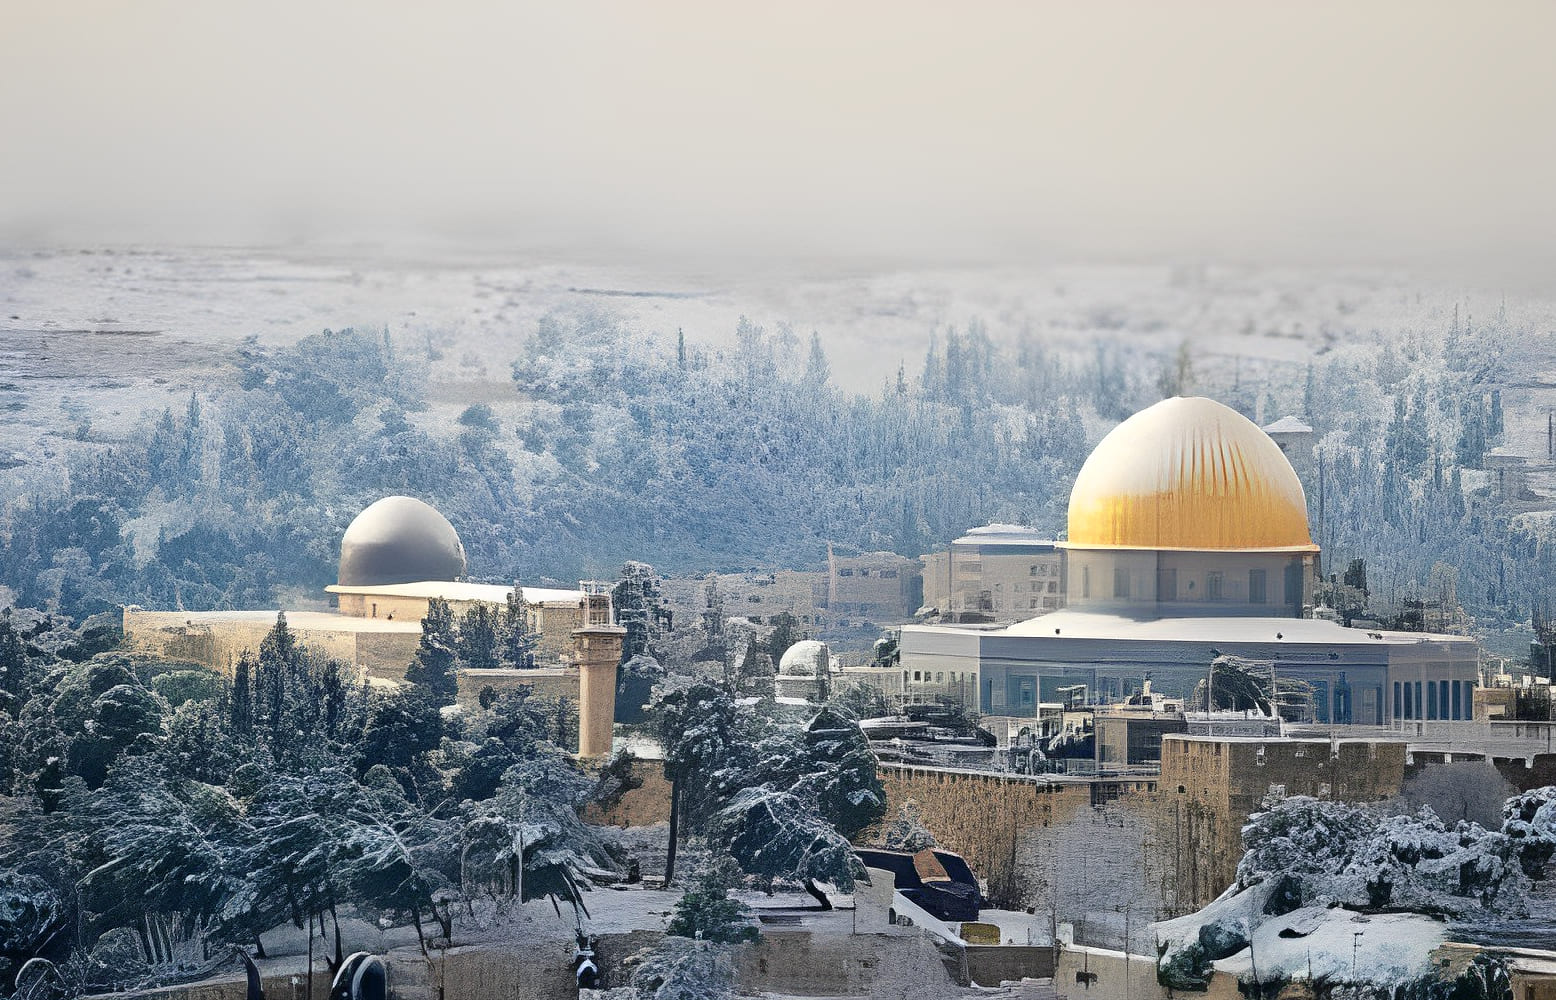 Plan it Israel guarantees a smooth travel experience to this year-round location. We update you throughout the winter.